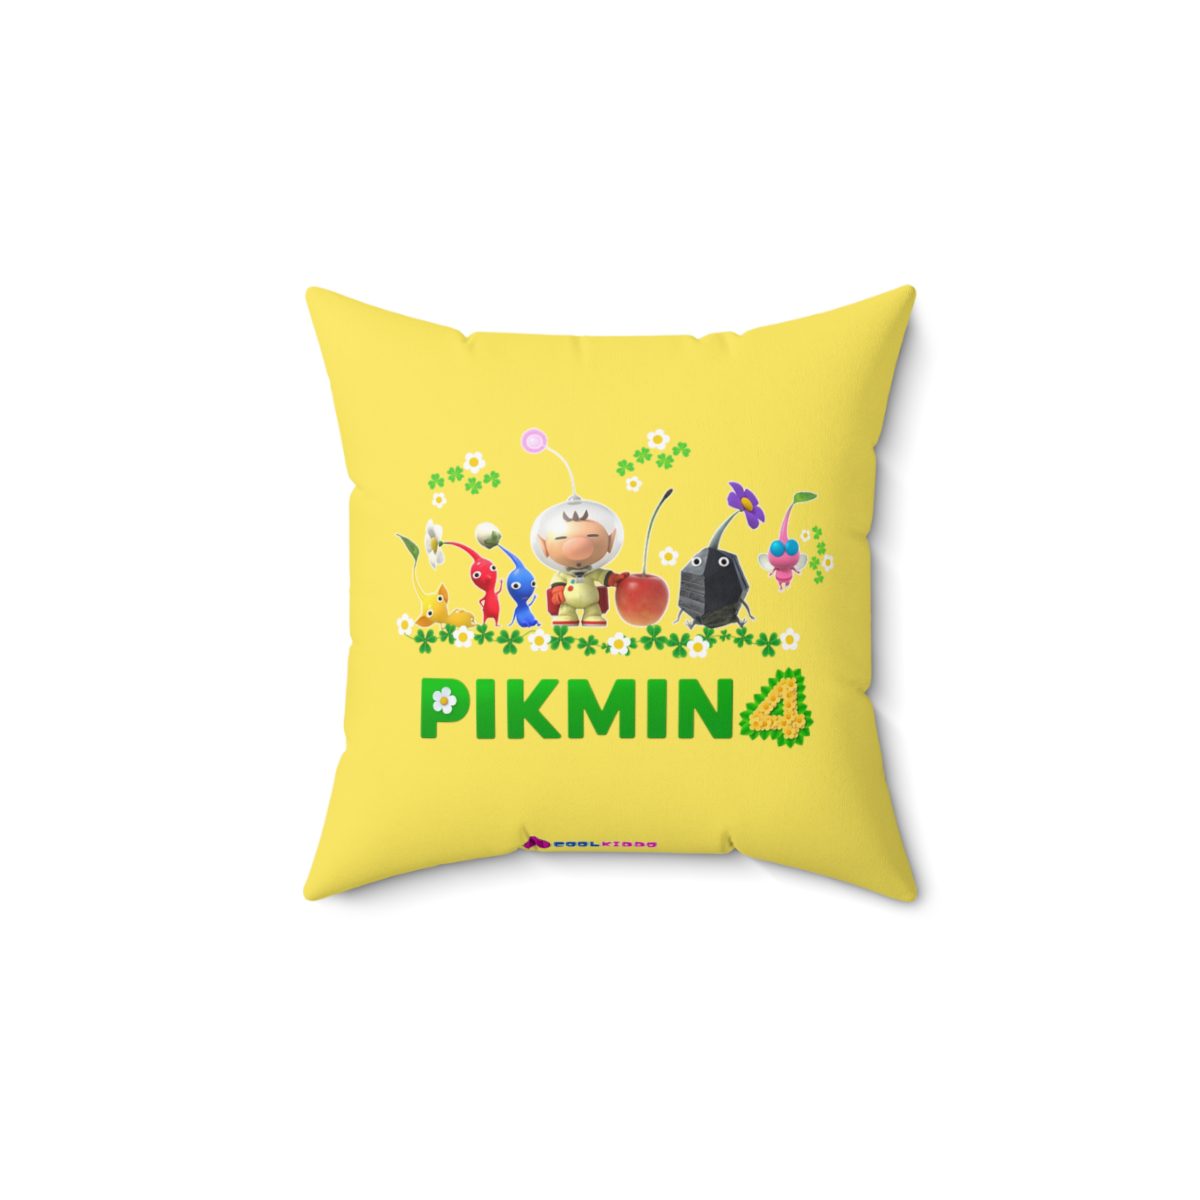 Pikmin 4 Yellow and Light Green Cushion (Double-Sided) Cool Kiddo 14